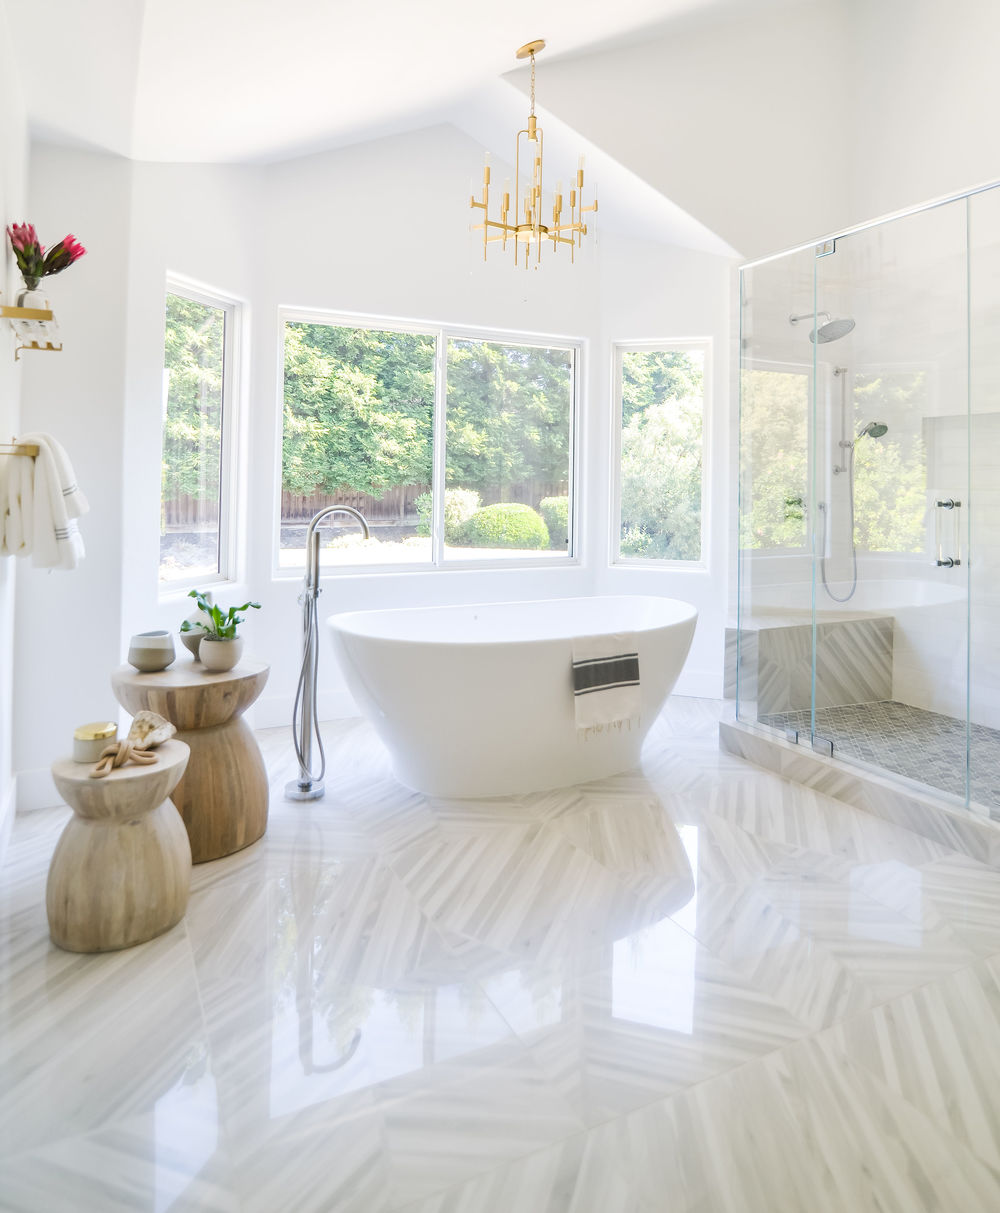 Master Bathroom gets a complete makeover with stunning tile work, custom cabinets, and a designer’s touch